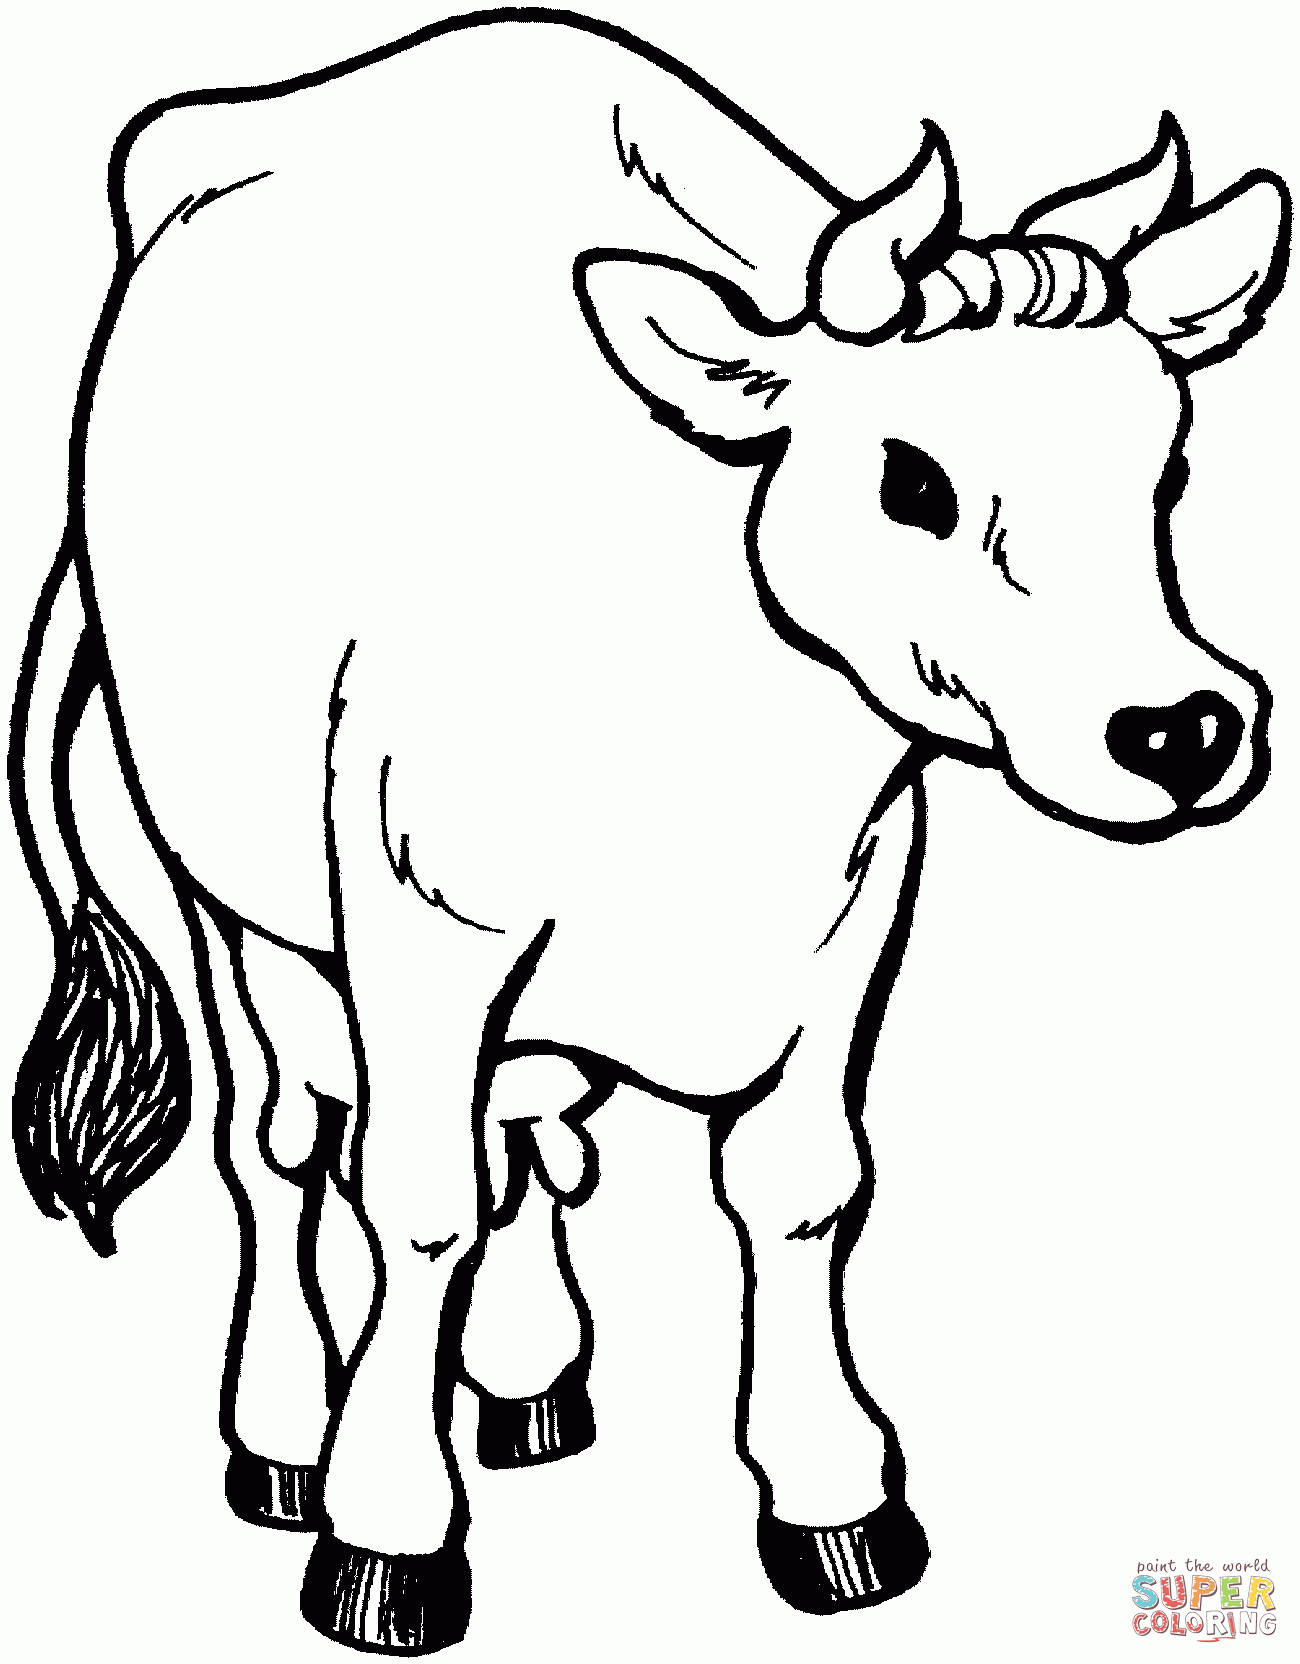 Cow 26 Coloring Page | Free Printable Coloring Pages - Coloring Pages Of Cows Free Printable